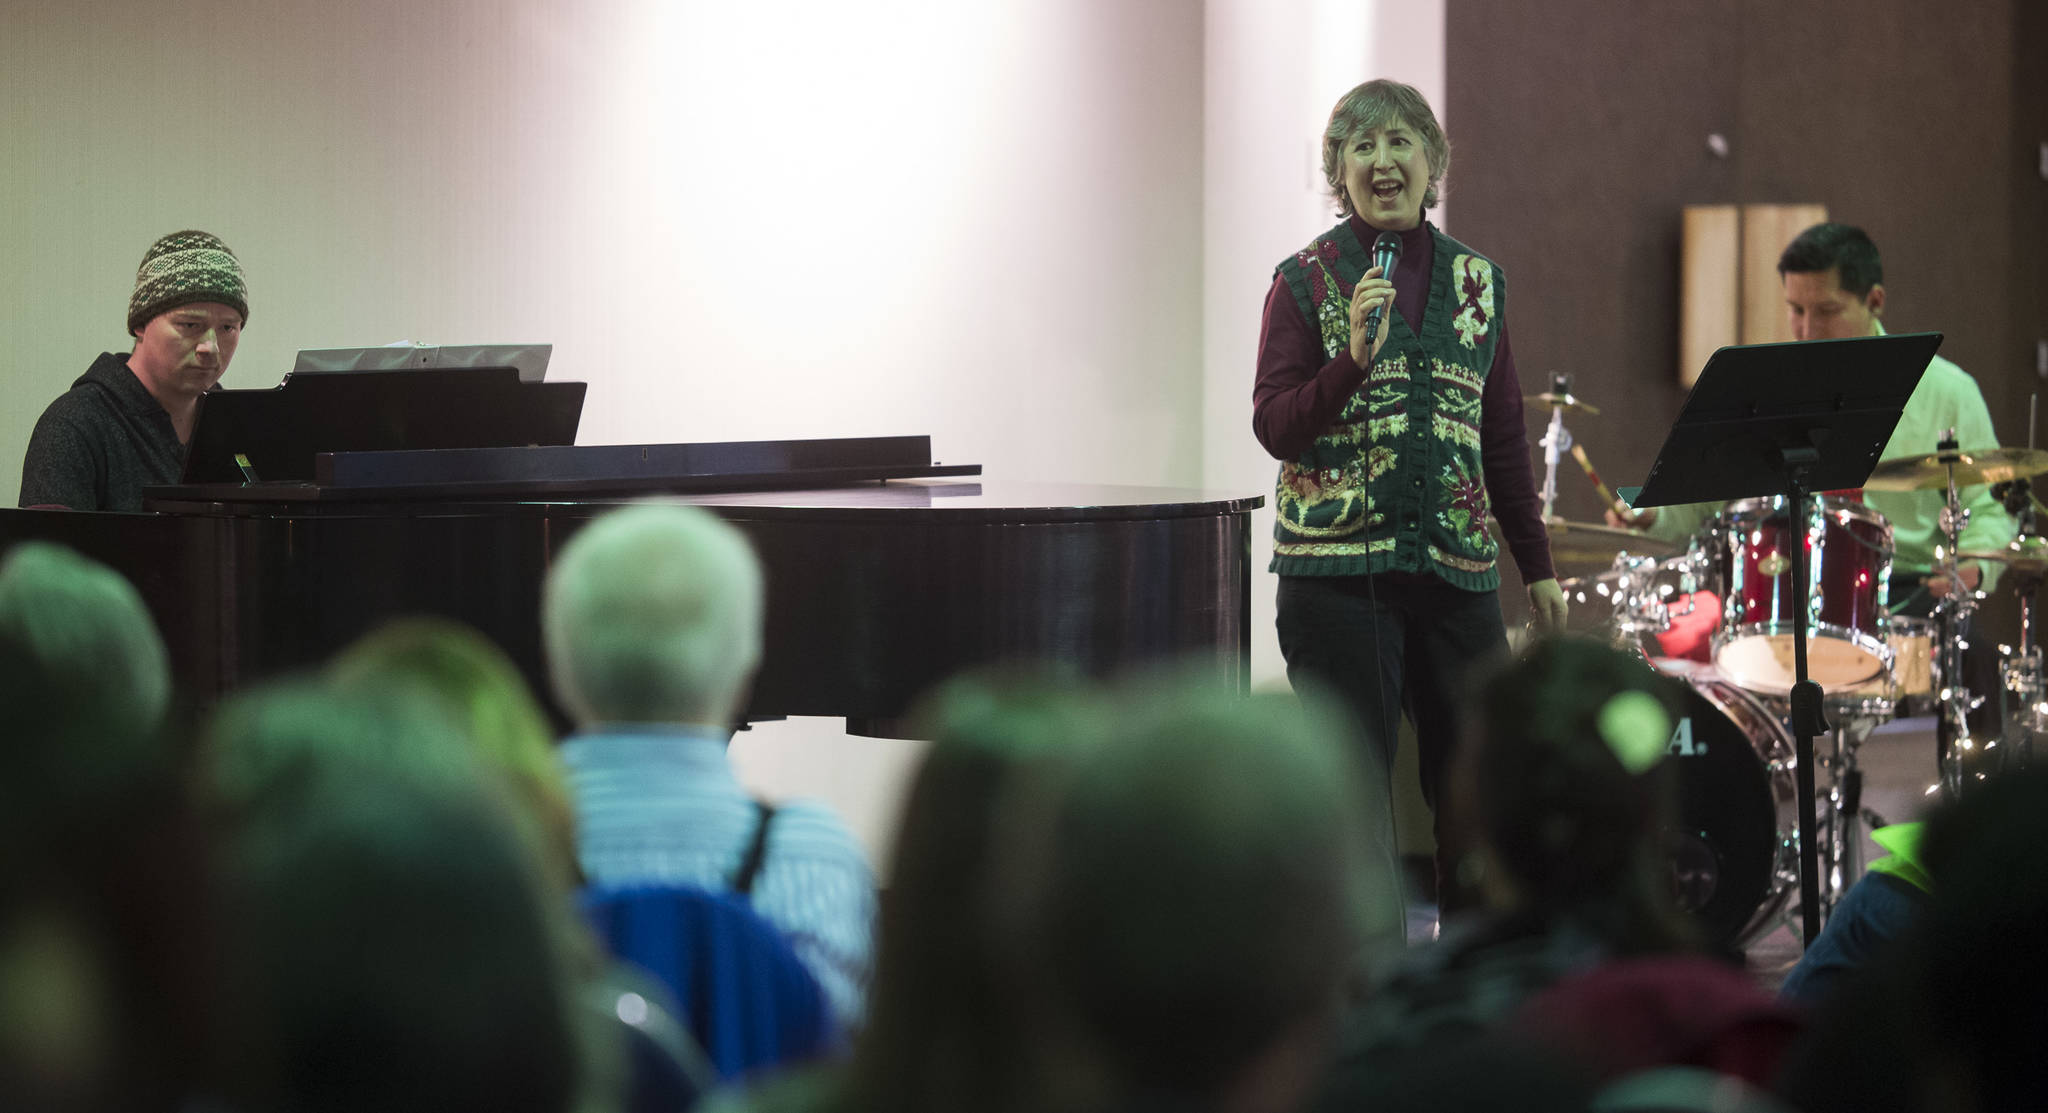 Juneau Cabaret singer Therese Thibodeau sings for Juneau residents as she is accompanied by Luke Weld and David Sheakley-Early during the third annual Holiday Extravaganza at Centennial Hall on Wednesday, Dec. 19, 2018. (Michael Penn | Juneau Empire)